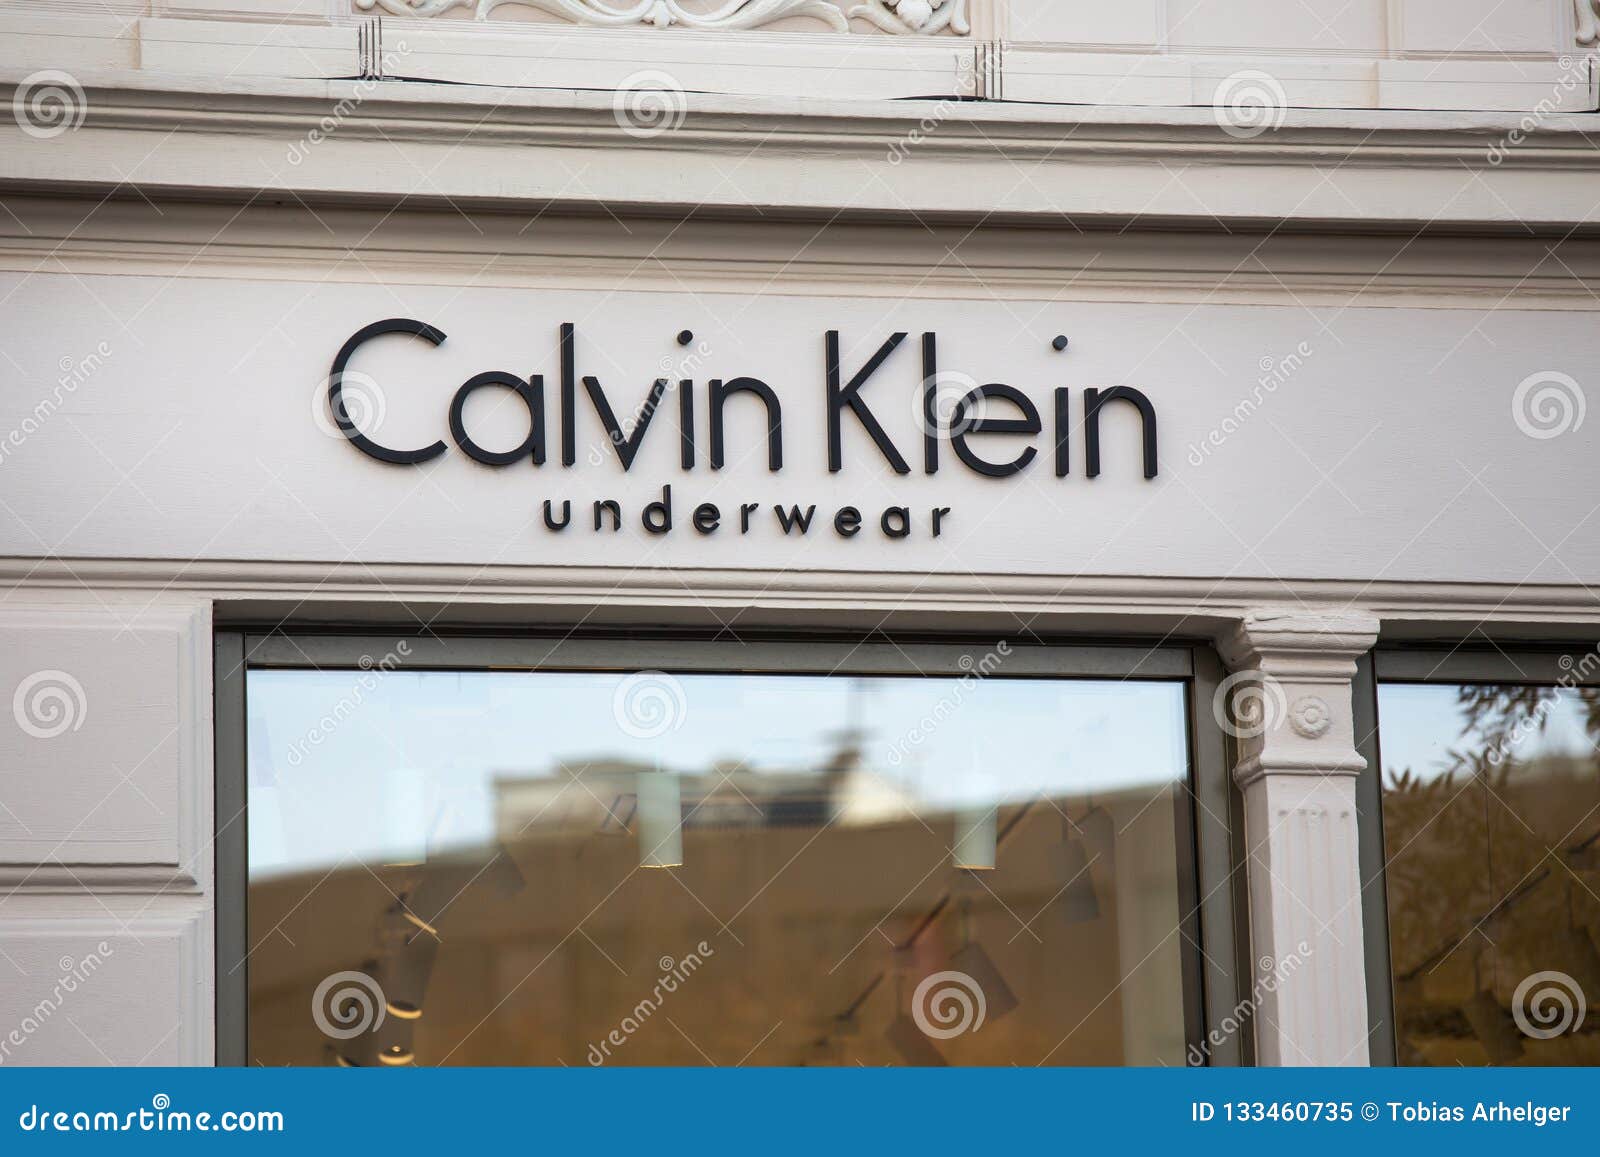 Aachen, North Rhine-Westphalia/germany - 06 11 18: Calvin Klein Underwear  Sign in Aachen Germany Editorial Image - Image of clothes, lights: 133460735